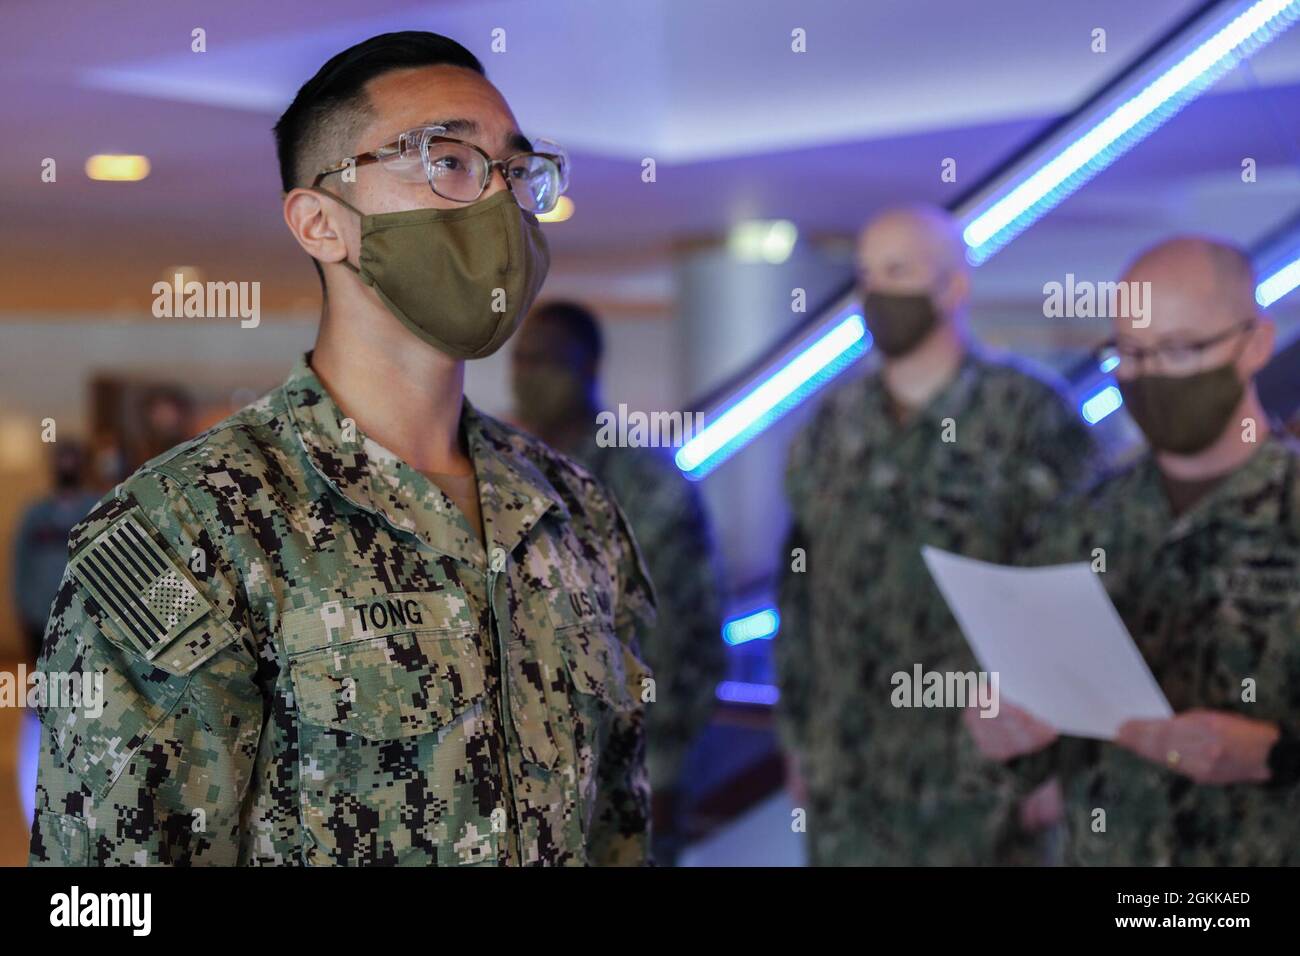 U.S. Navy Petty Officer 3rd Class Lane Tong, a hospital corpsman assigned  to Naval Medical Center Portsmouth, Virginia, stands at attention during  his promotion ceremony while deployed in Boston, May 14, 2021.